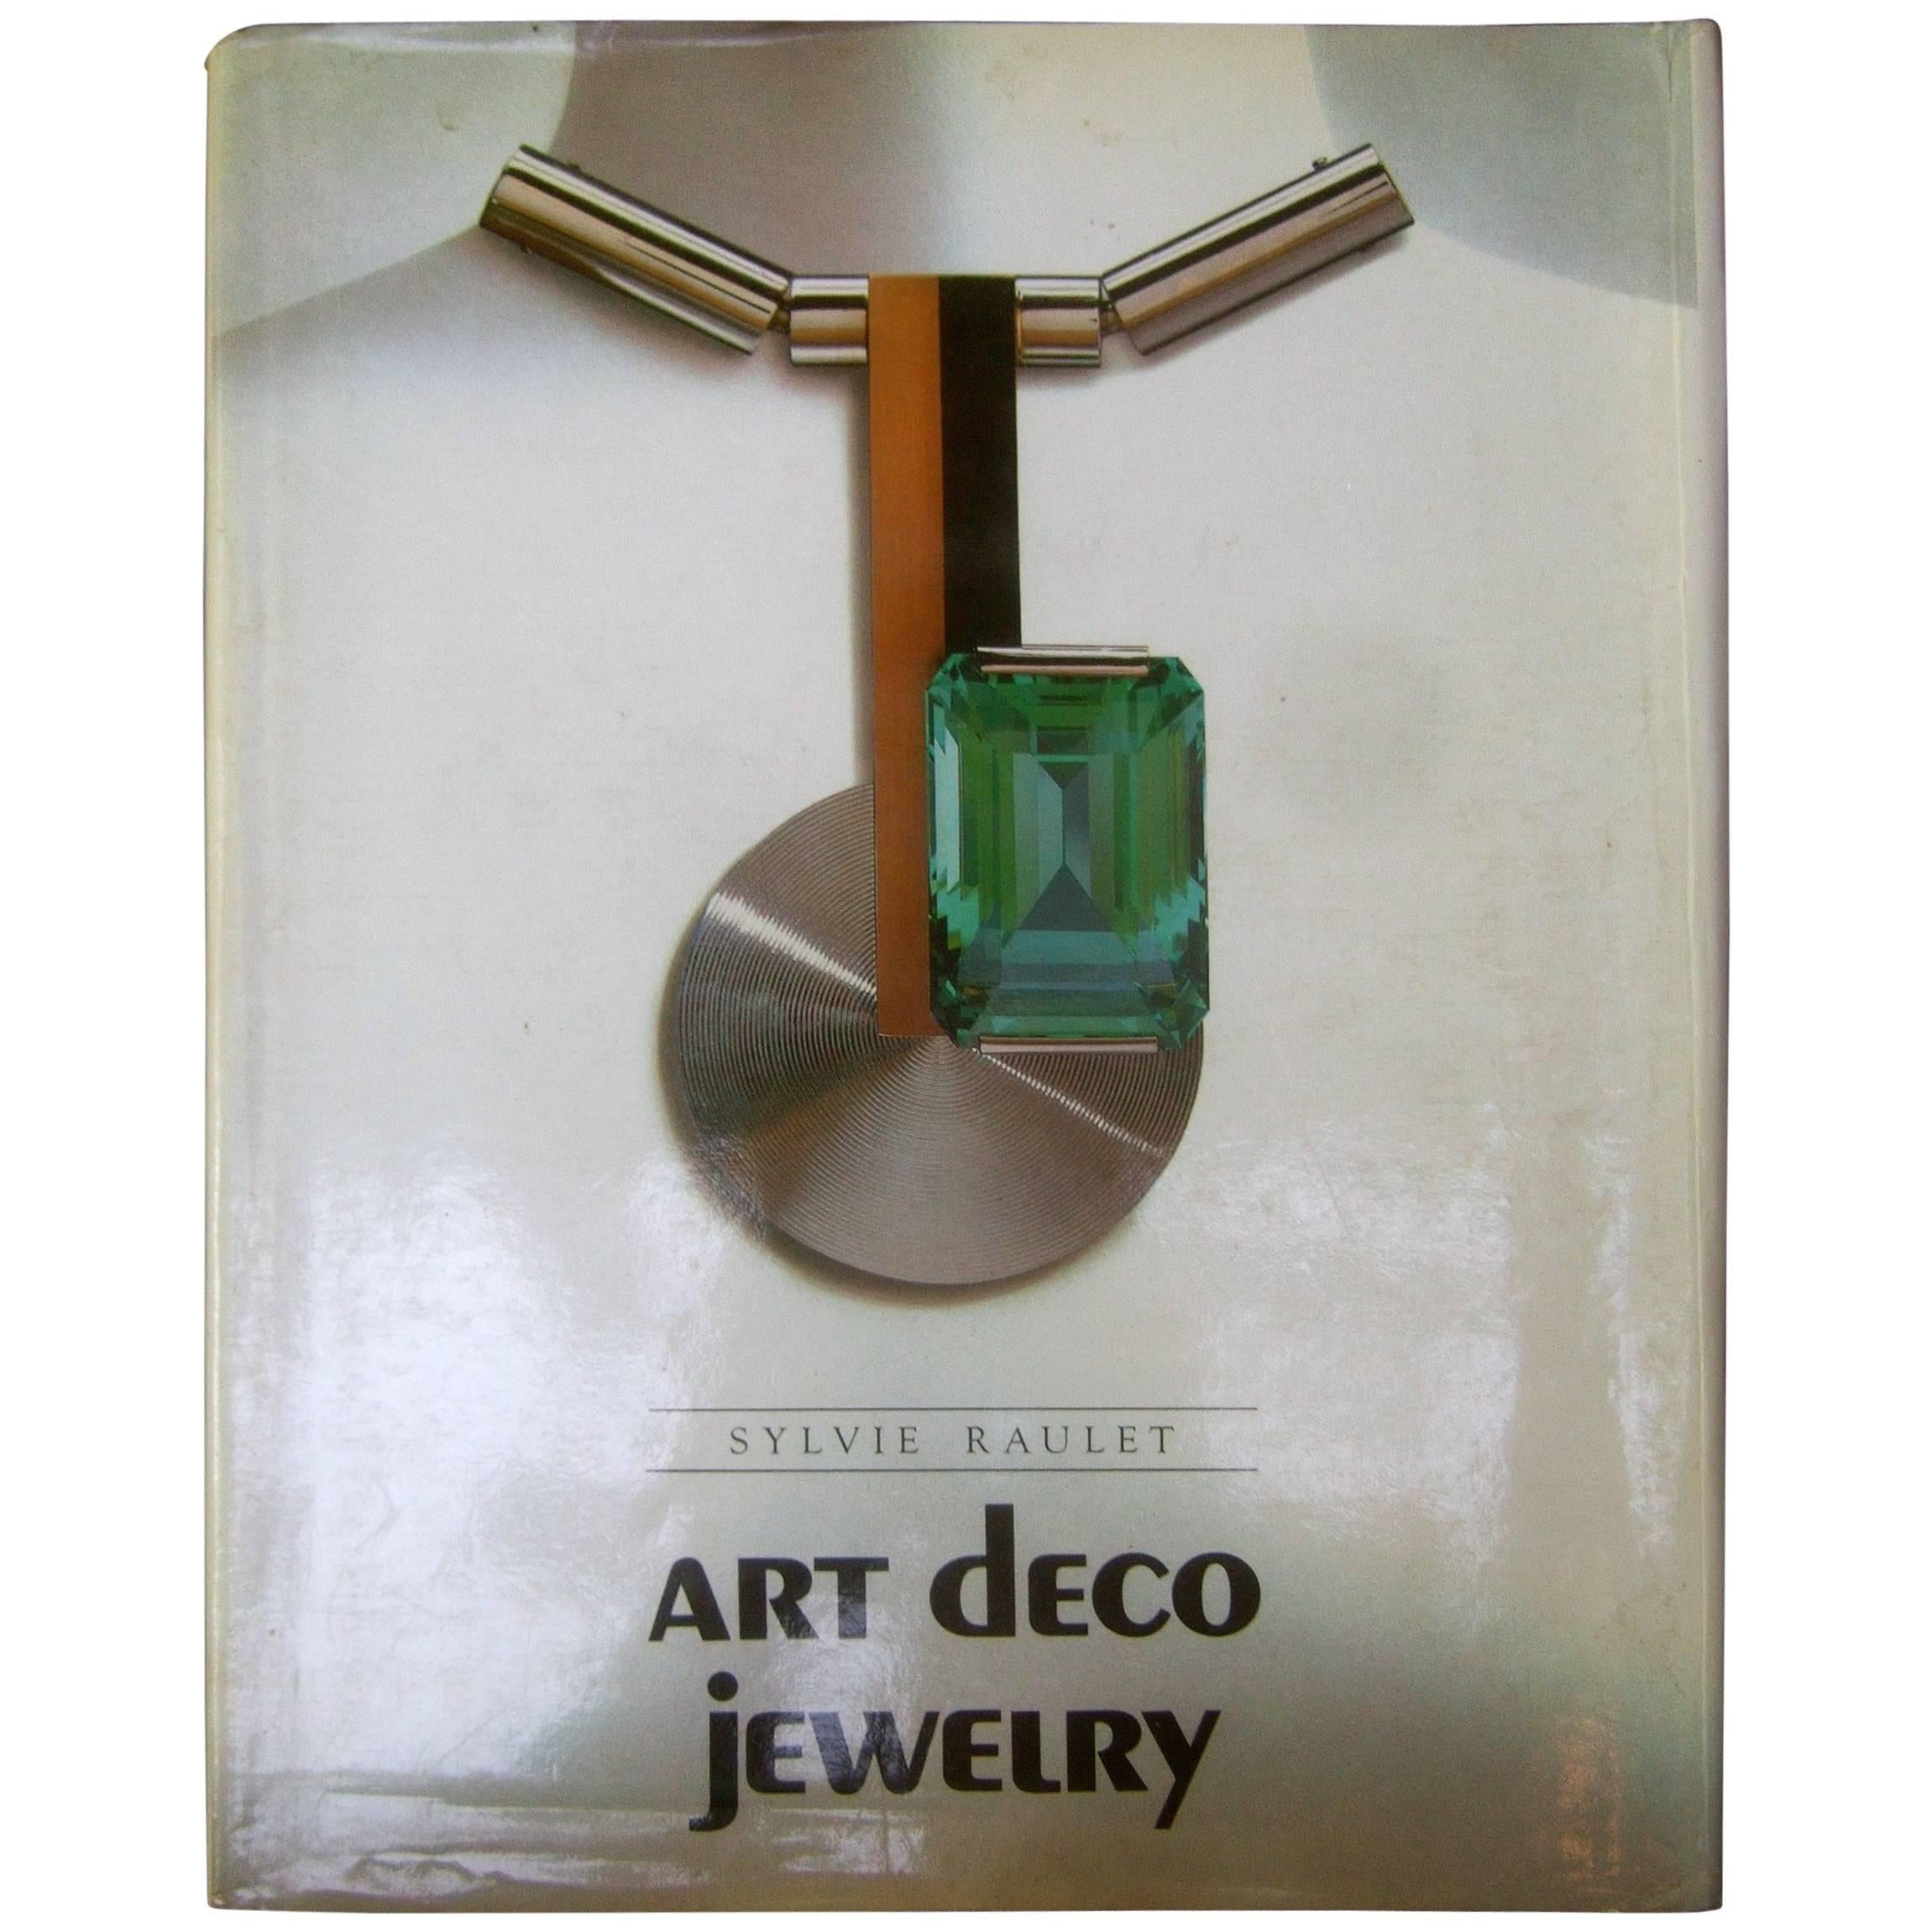 Art Deco Jewelry Hard Cover Book by Sylvie Raulet for Rizzoli c 1989